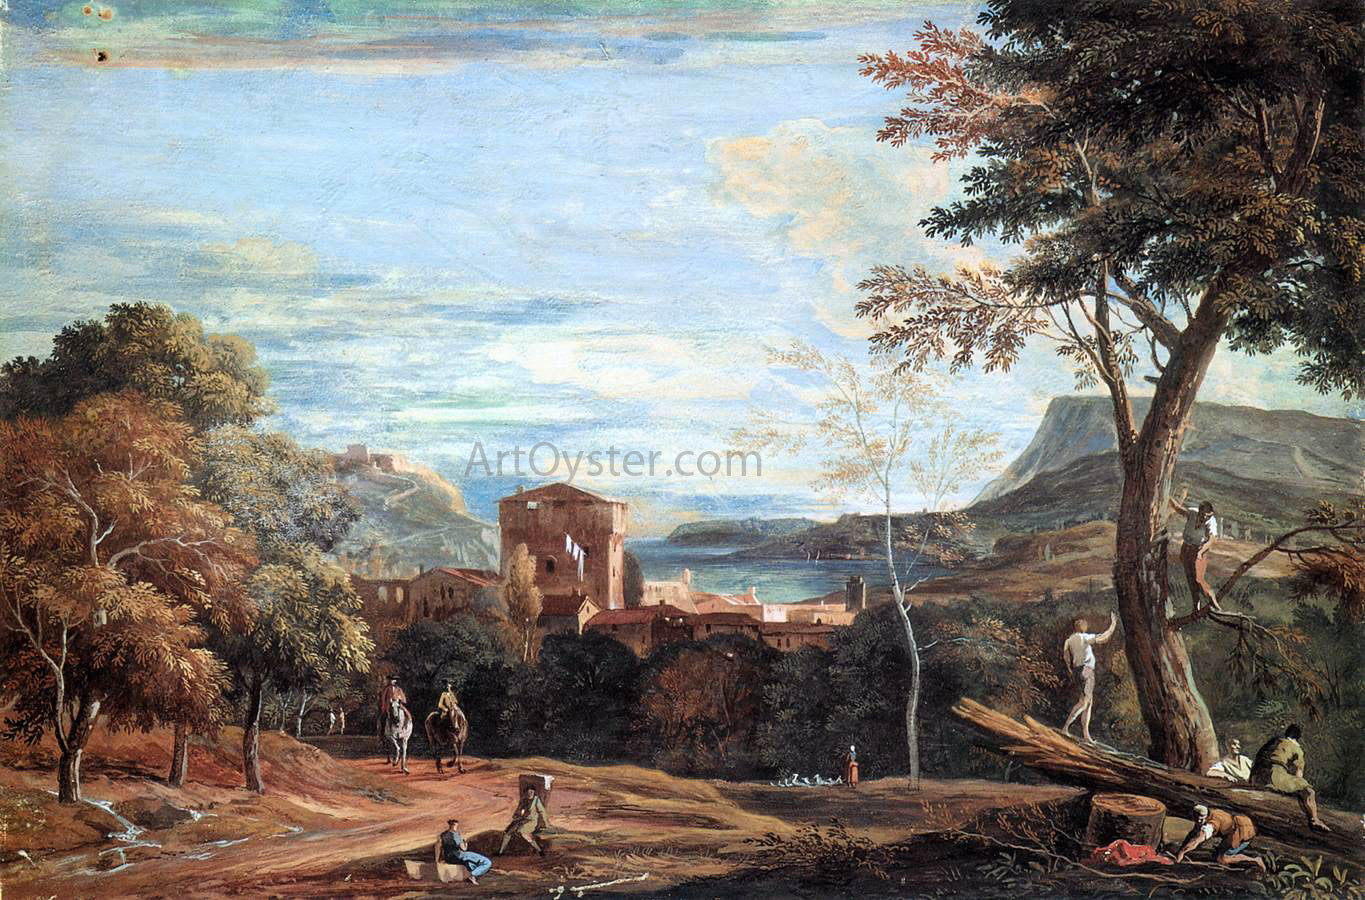  Marco Ricci Landscape with Woodcutters and Two Horsemen - Hand Painted Oil Painting